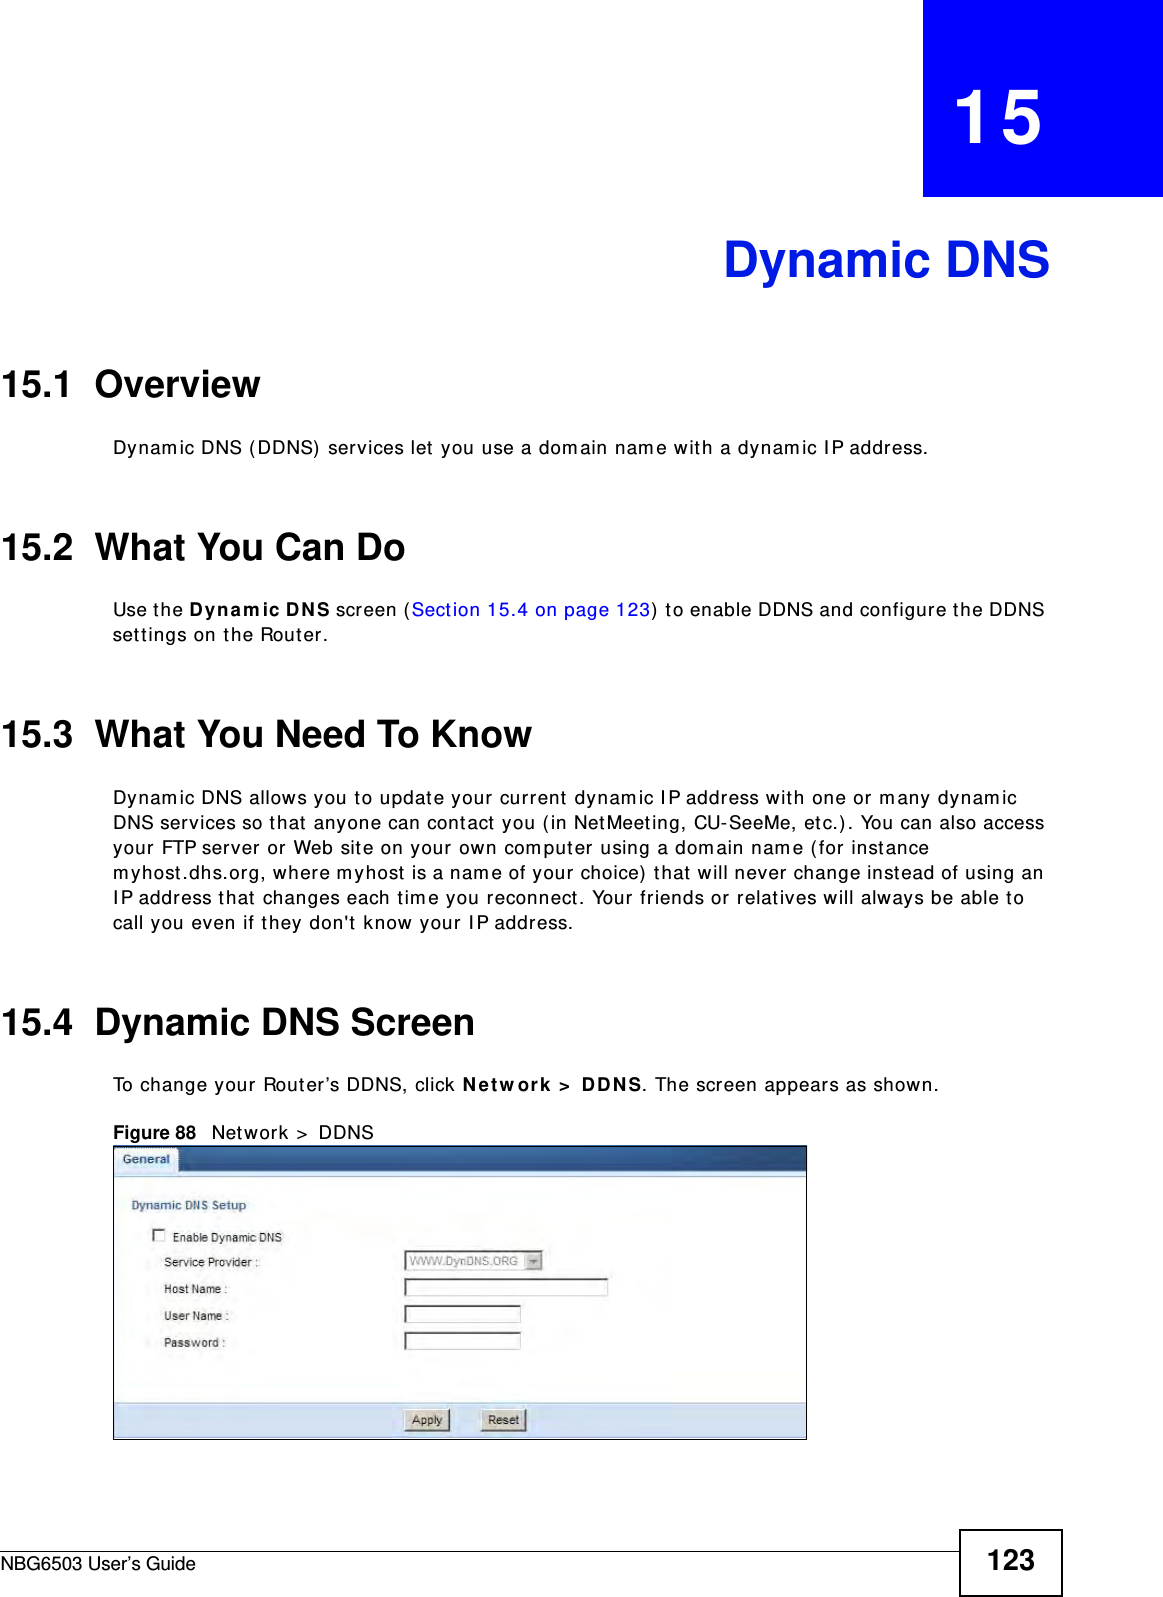 NBG6503 User’s Guide 123CHAPTER   15Dynamic DNS15.1  Overview Dynamic DNS (DDNS) services let you use a domain name with a dynamic IP address.15.2  What You Can DoUse the Dynamic DNS screen (Section 15.4 on page 123) to enable DDNS and configure the DDNS settings on the Router.15.3  What You Need To KnowDynamic DNS allows you to update your current dynamic IP address with one or many dynamic DNS services so that anyone can contact you (in NetMeeting, CU-SeeMe, etc.). You can also access your FTP server or Web site on your own computer using a domain name (for instance myhost.dhs.org, where myhost is a name of your choice) that will never change instead of using an IP address that changes each time you reconnect. Your friends or relatives will always be able to call you even if they don&apos;t know your IP address.15.4  Dynamic DNS Screen   To change your Router’s DDNS, click Network &gt; DDNS. The screen appears as shown.Figure 88   Network &gt; DDNS